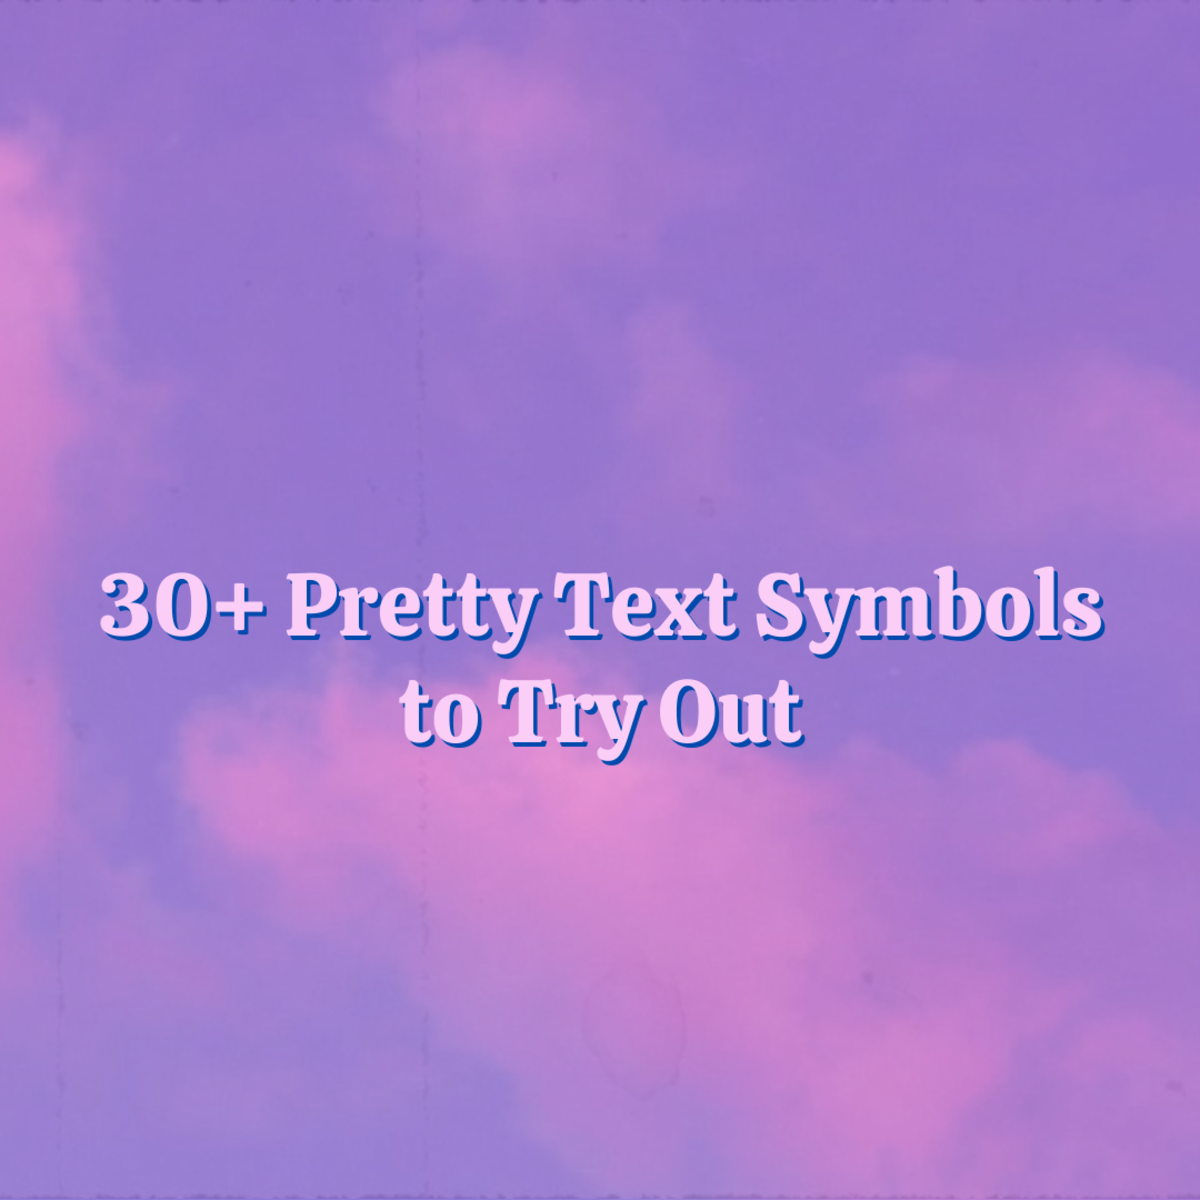 In this guide, we'll take a look at lots of pretty text symbols for you to try out!